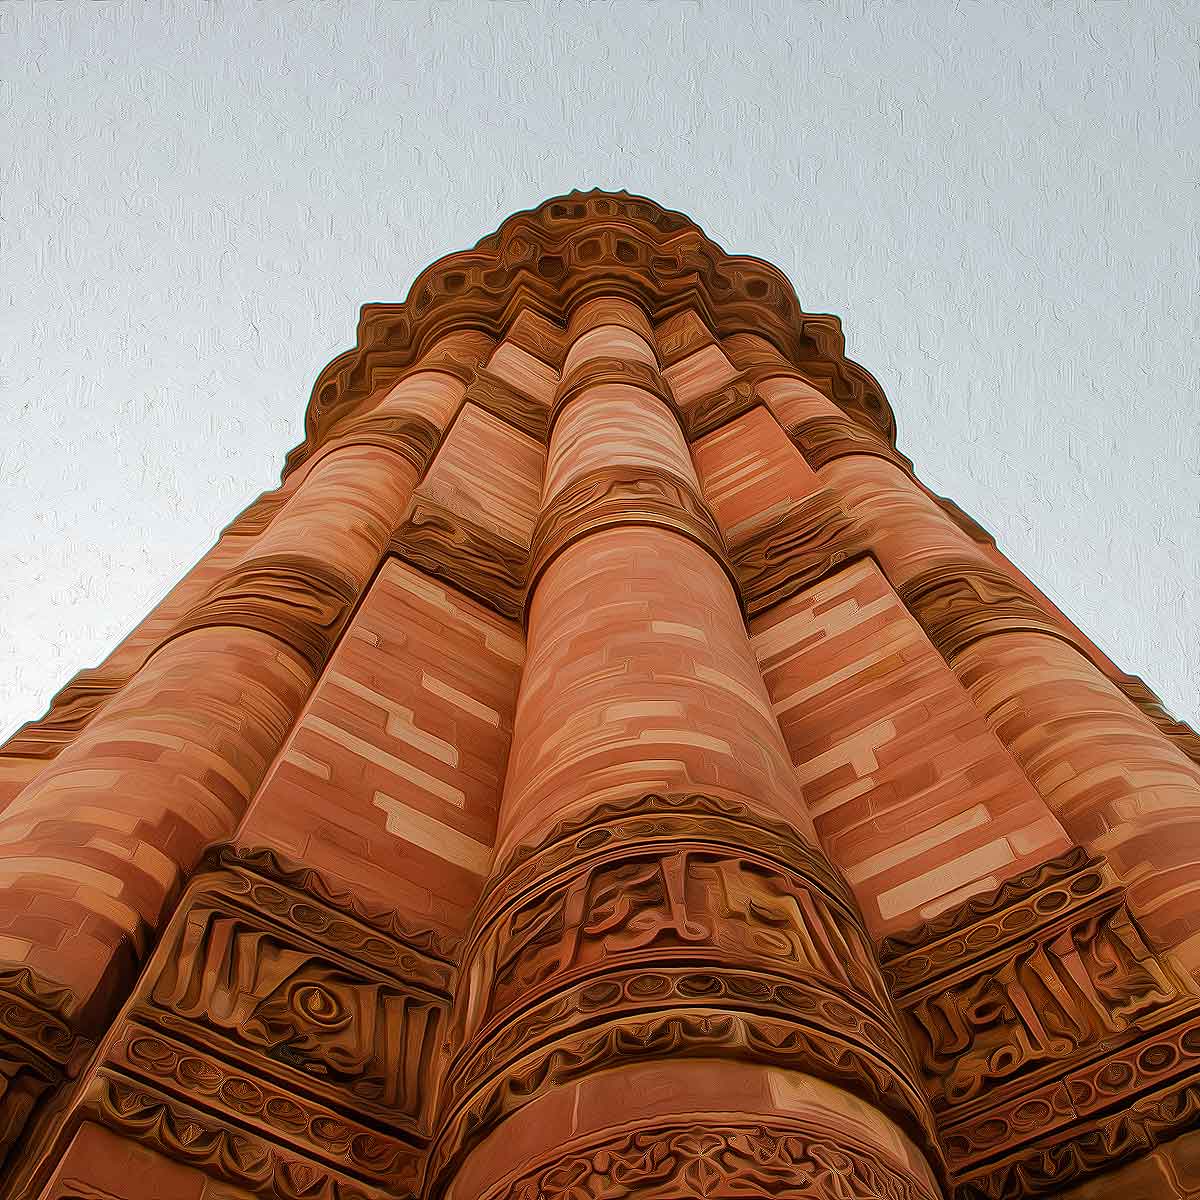 Delhi Tourism website clearly mentions that the 73-metre high Qutub Minar was built using the material obtained from 27 Hindu and Jain temples